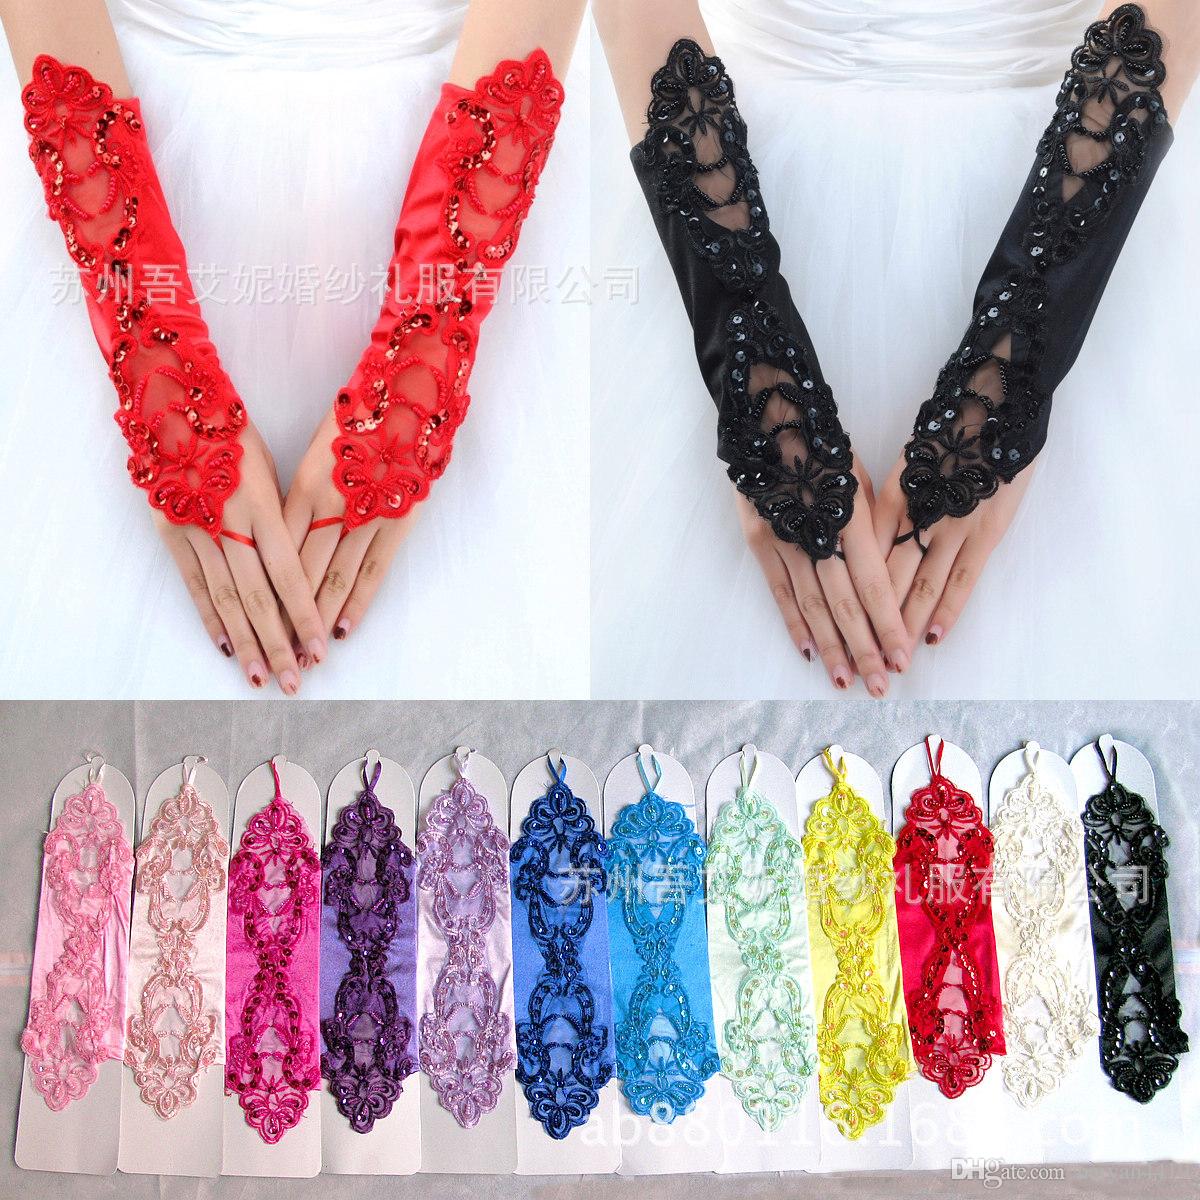 New Free Shipping Cheap Long Below Elbow Length Gloves For bride Black Red Fingerless Lace Pearl Beads Wedding Accessories Bridal Gloves